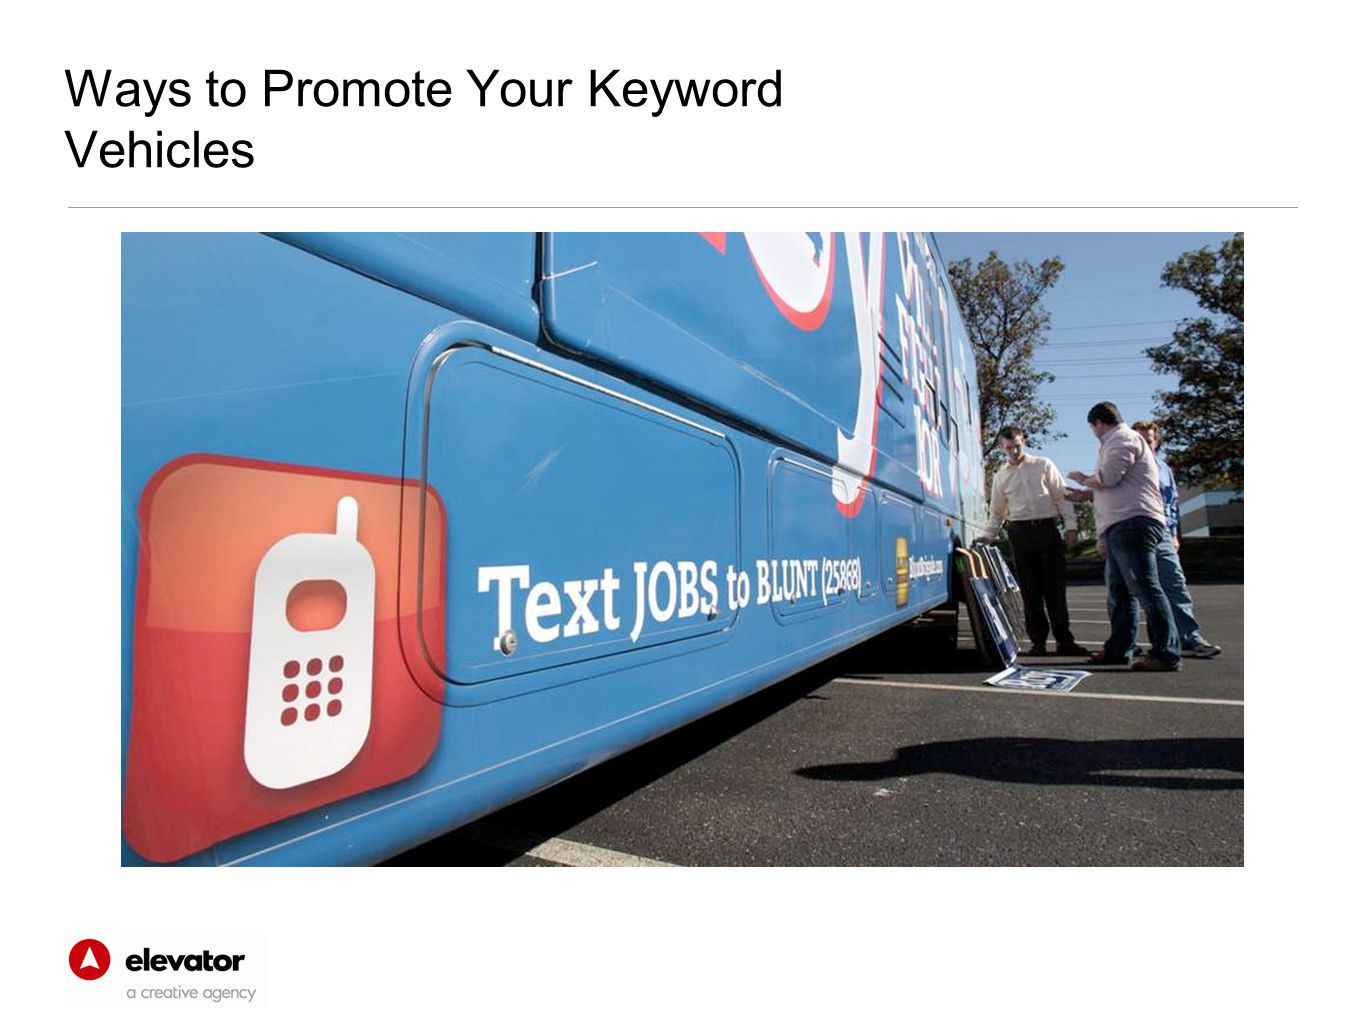 Ways to Promote Your Keyword Vehicles